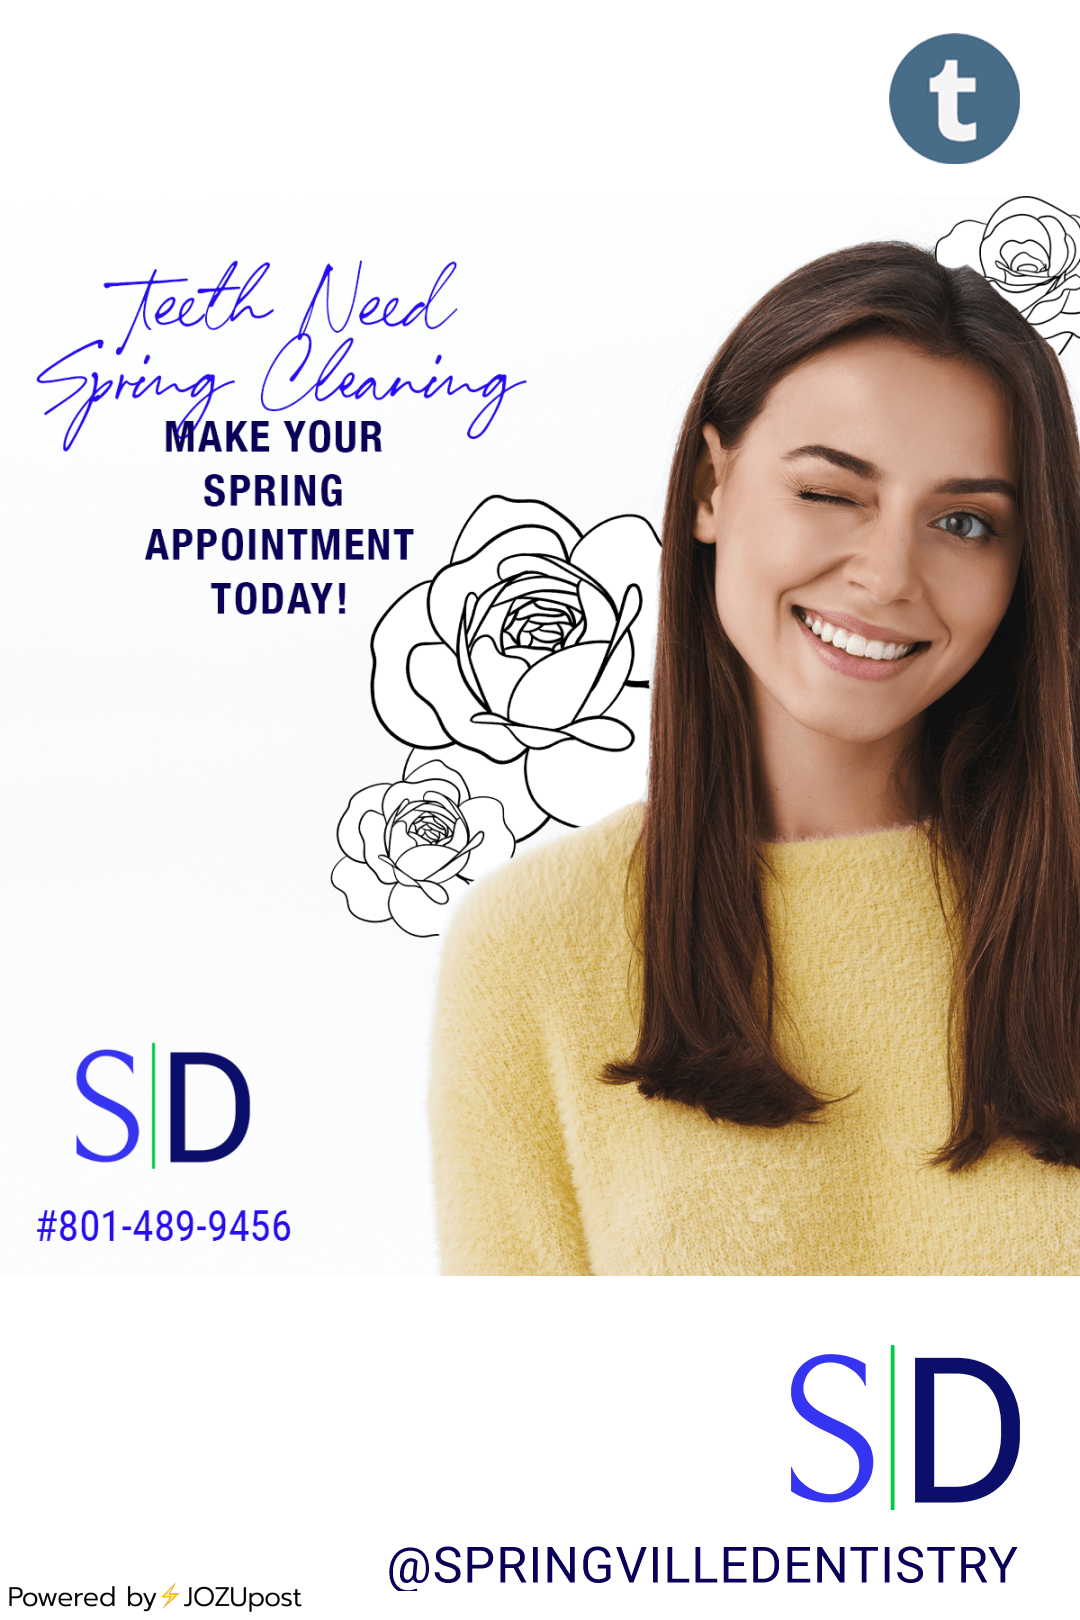 Are you ready to get a head start on your spring cleaning? Just like your house - Teeth Need Spring Cleaning. Call us to make your appointment for your checkup and cleaning. Your teeth and mouth always feel better when they are clean! Call...